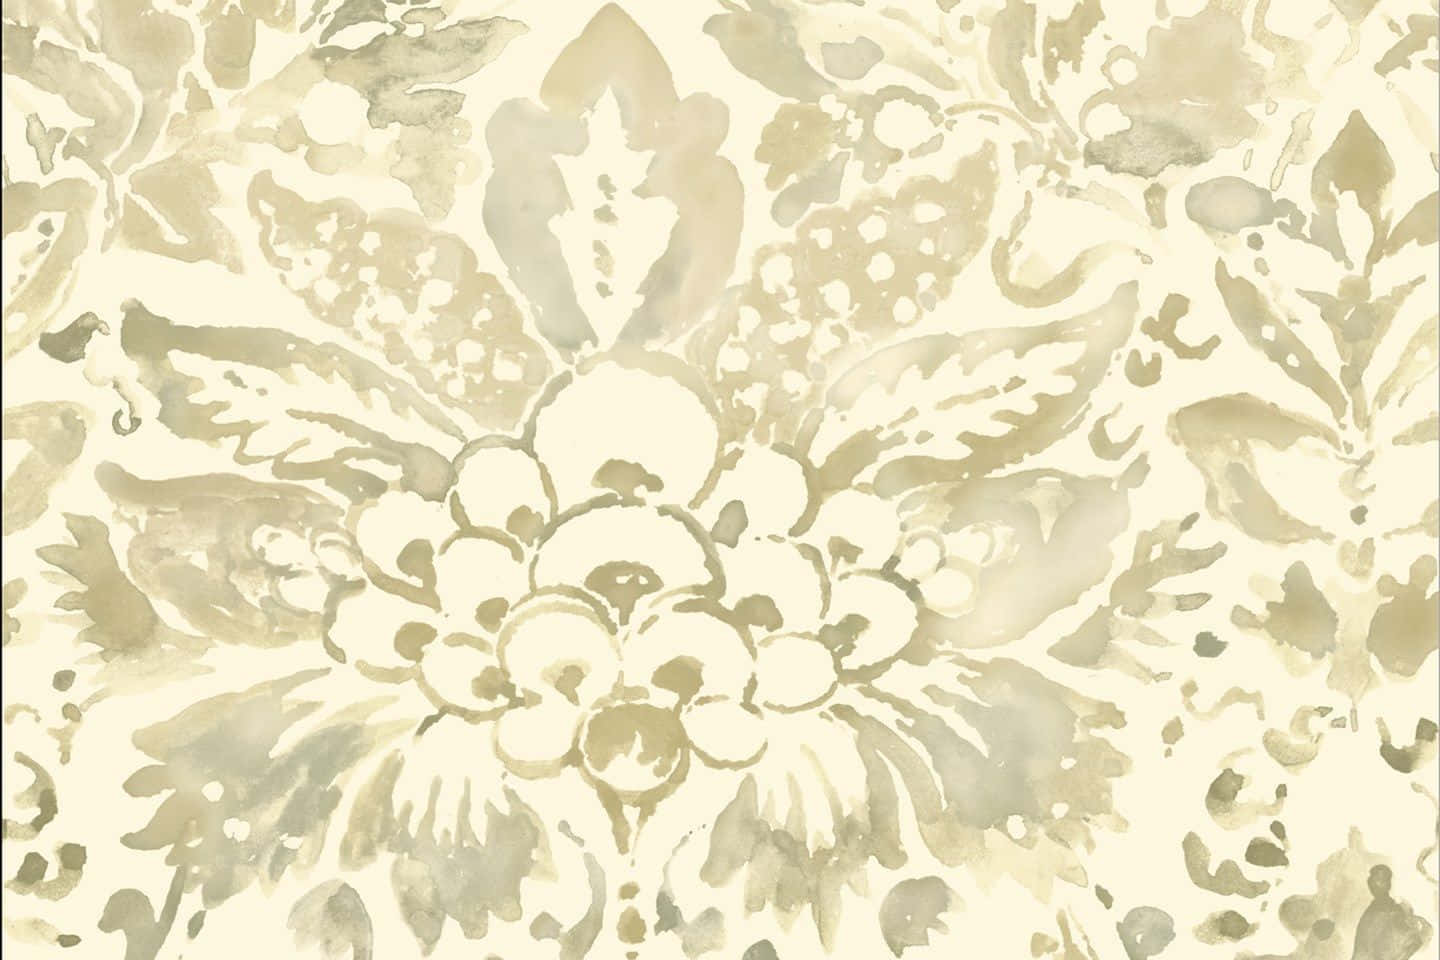 A background of classic ivory texture, with swirls and shadows of subtle tones.